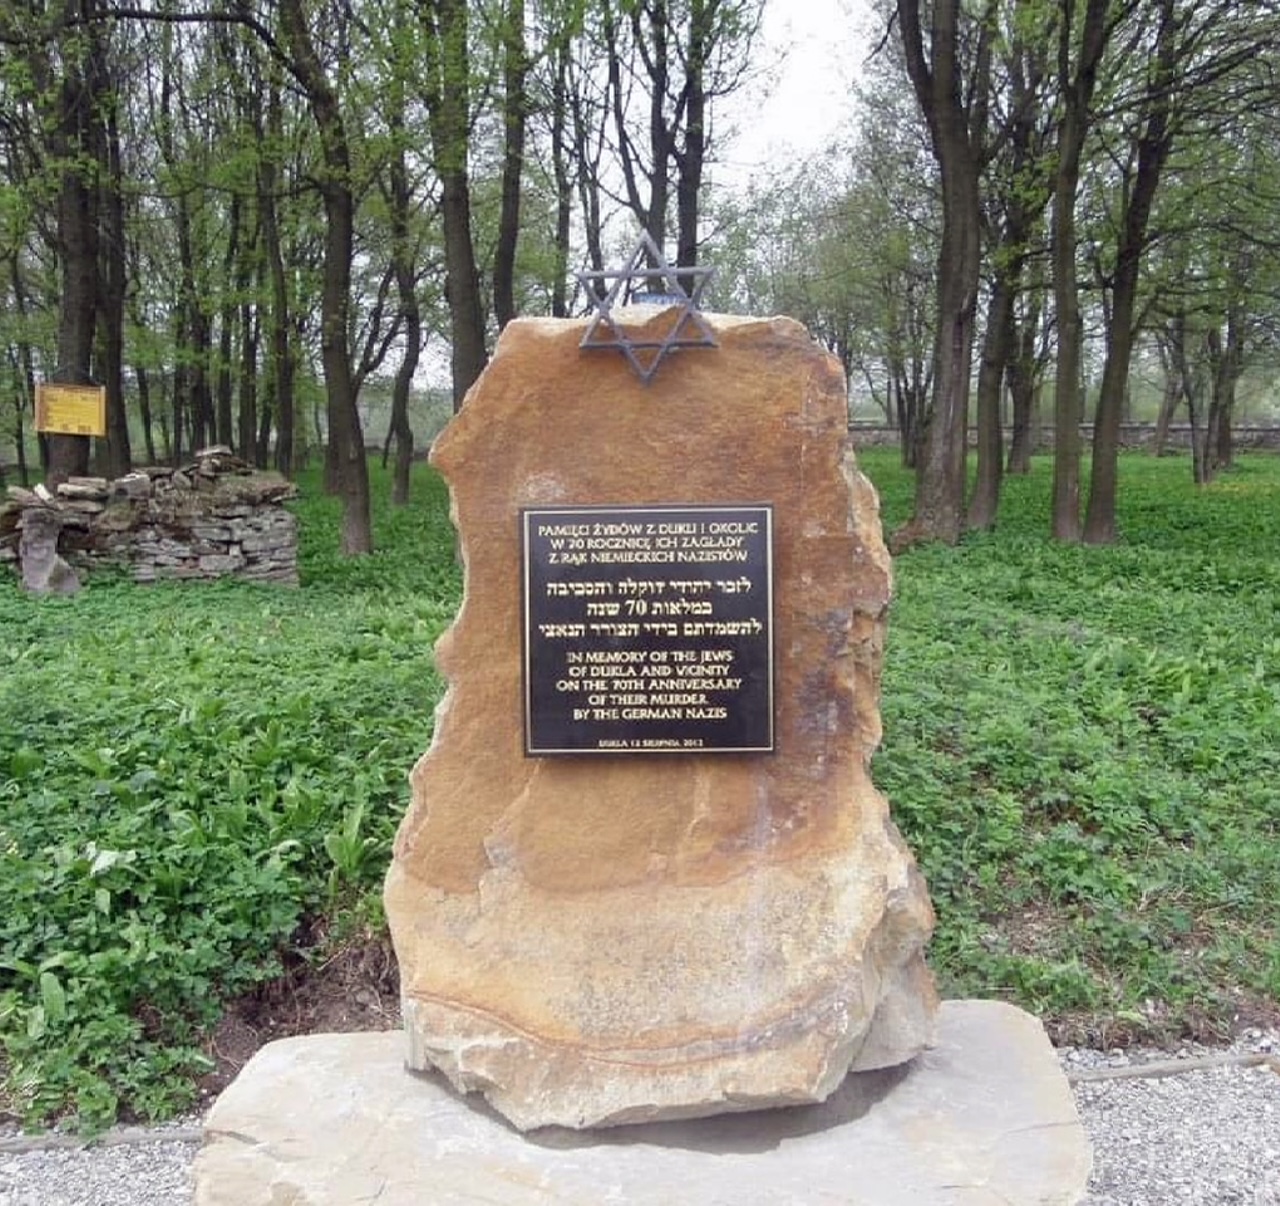 Completed Memorial in April 2013